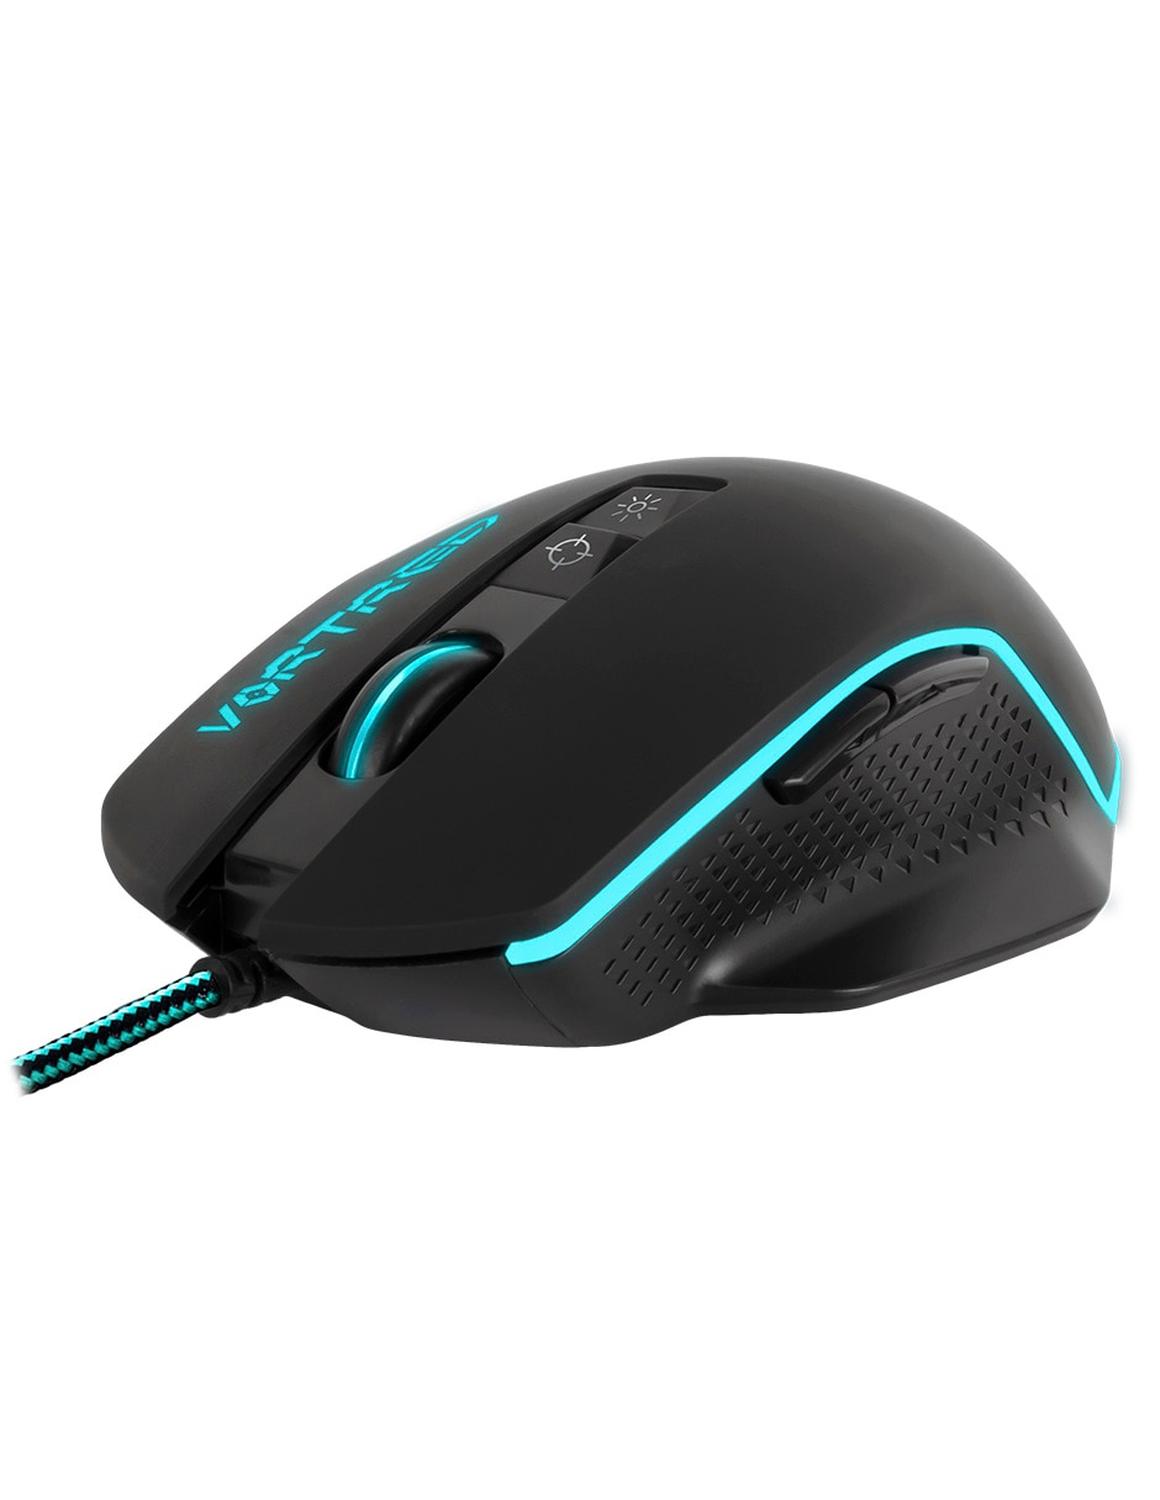 Mouse Gaming Vortred, Alámbrico, Negro